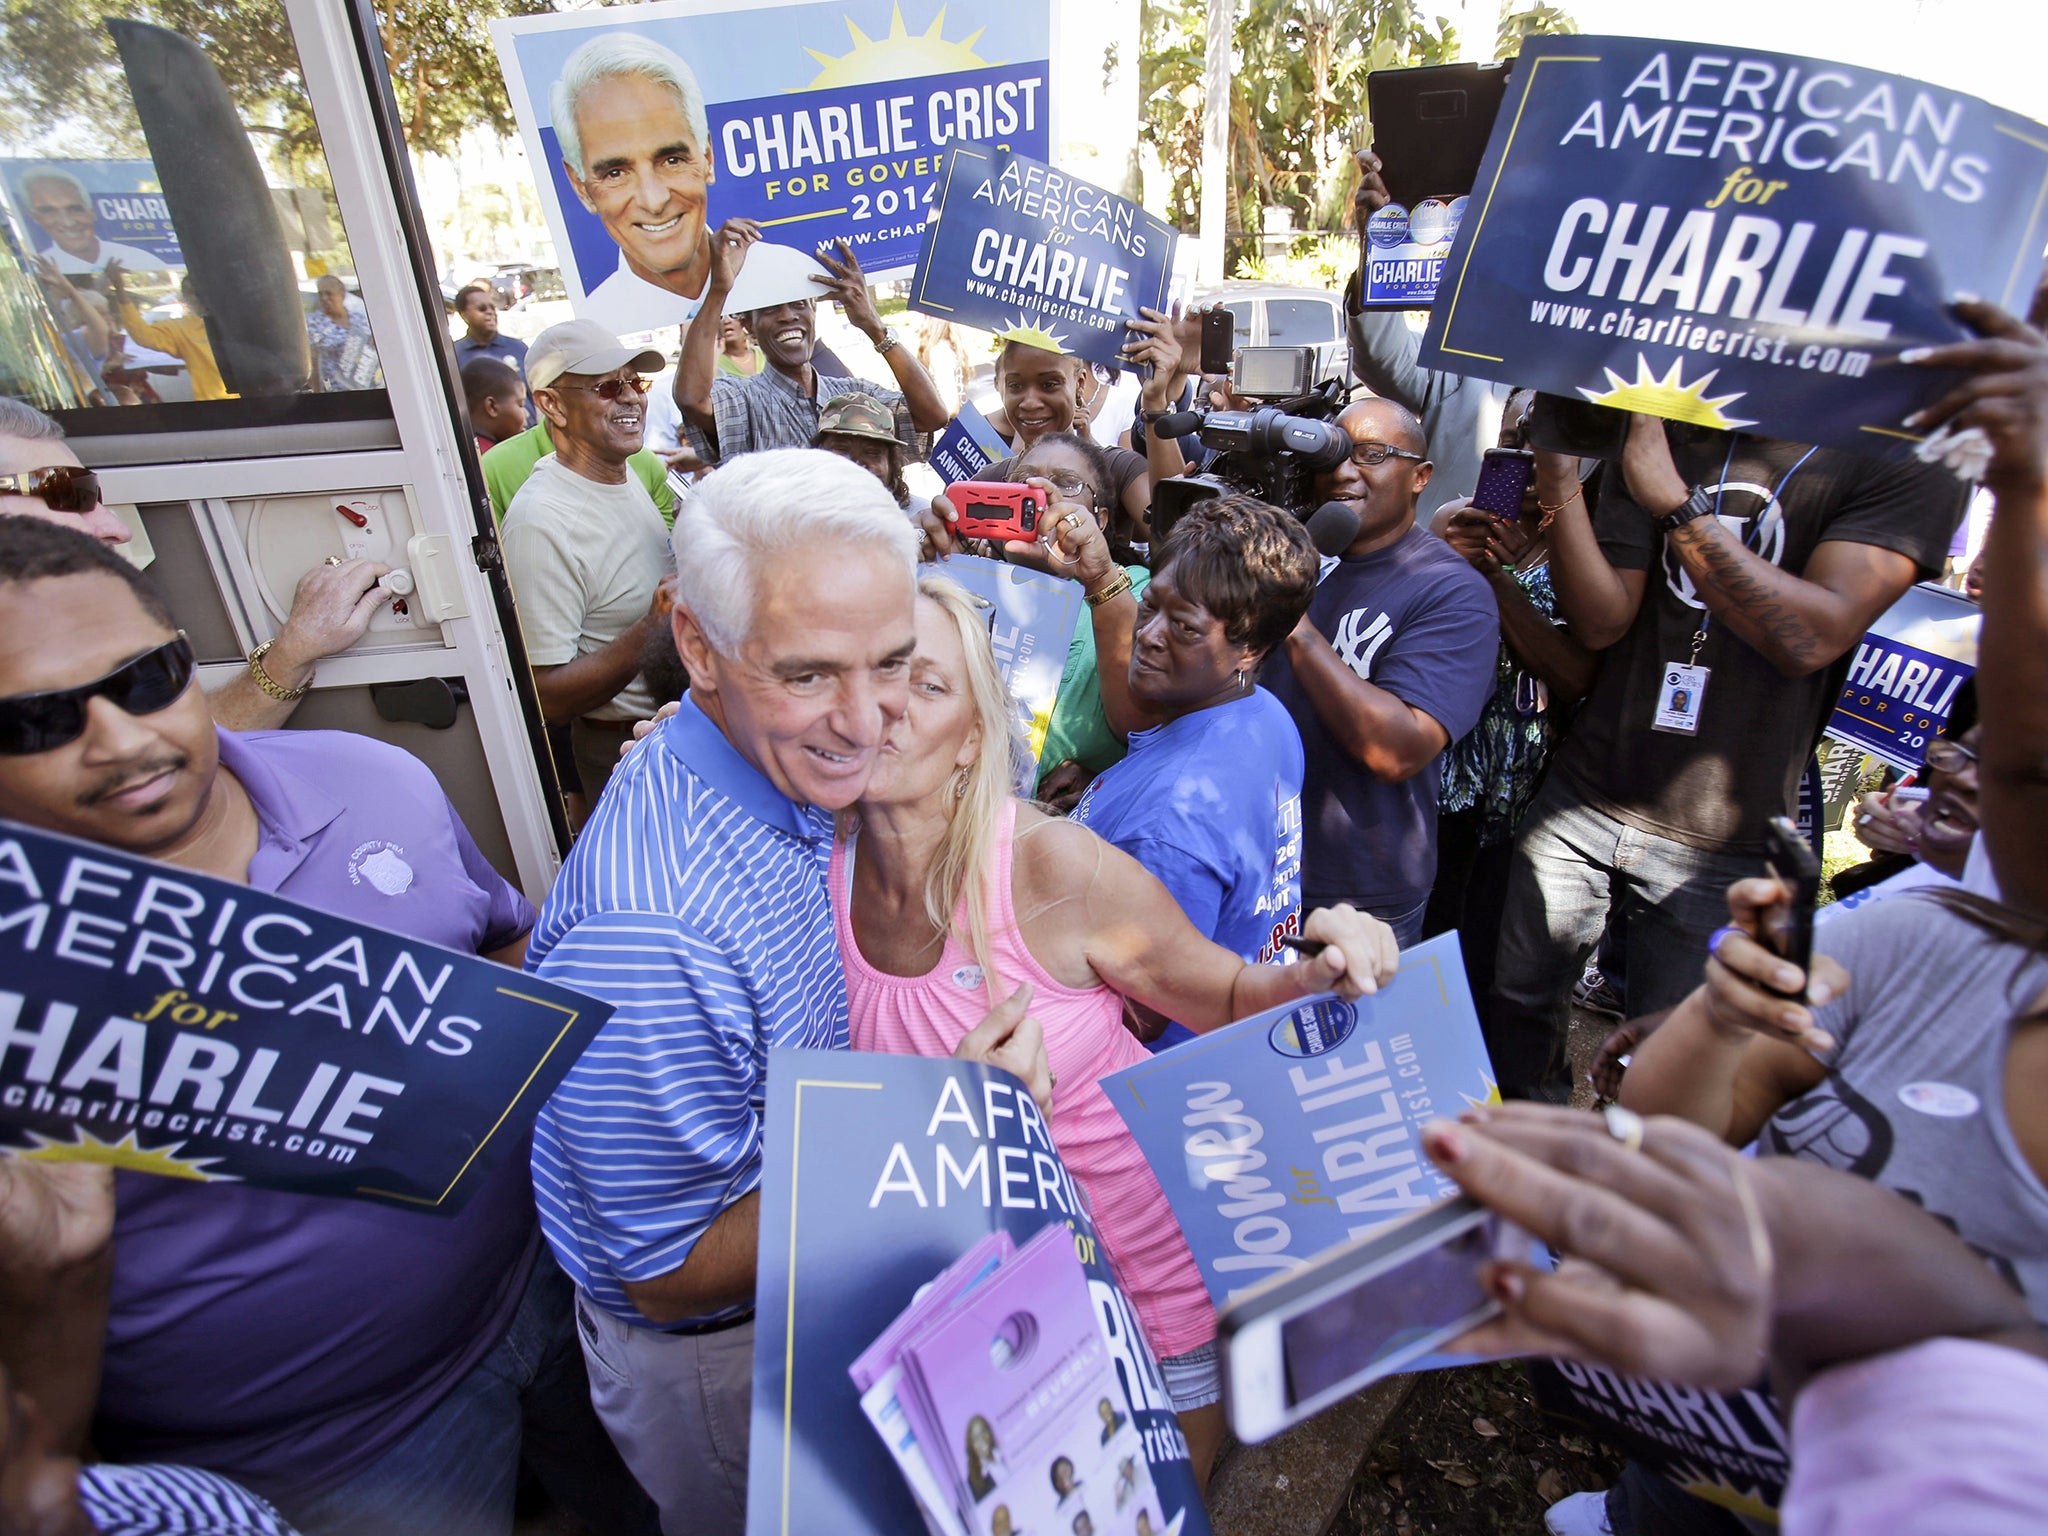 Charlie Crist, now a Democrat candidate for governor, campaigning in Fort Lauderdale